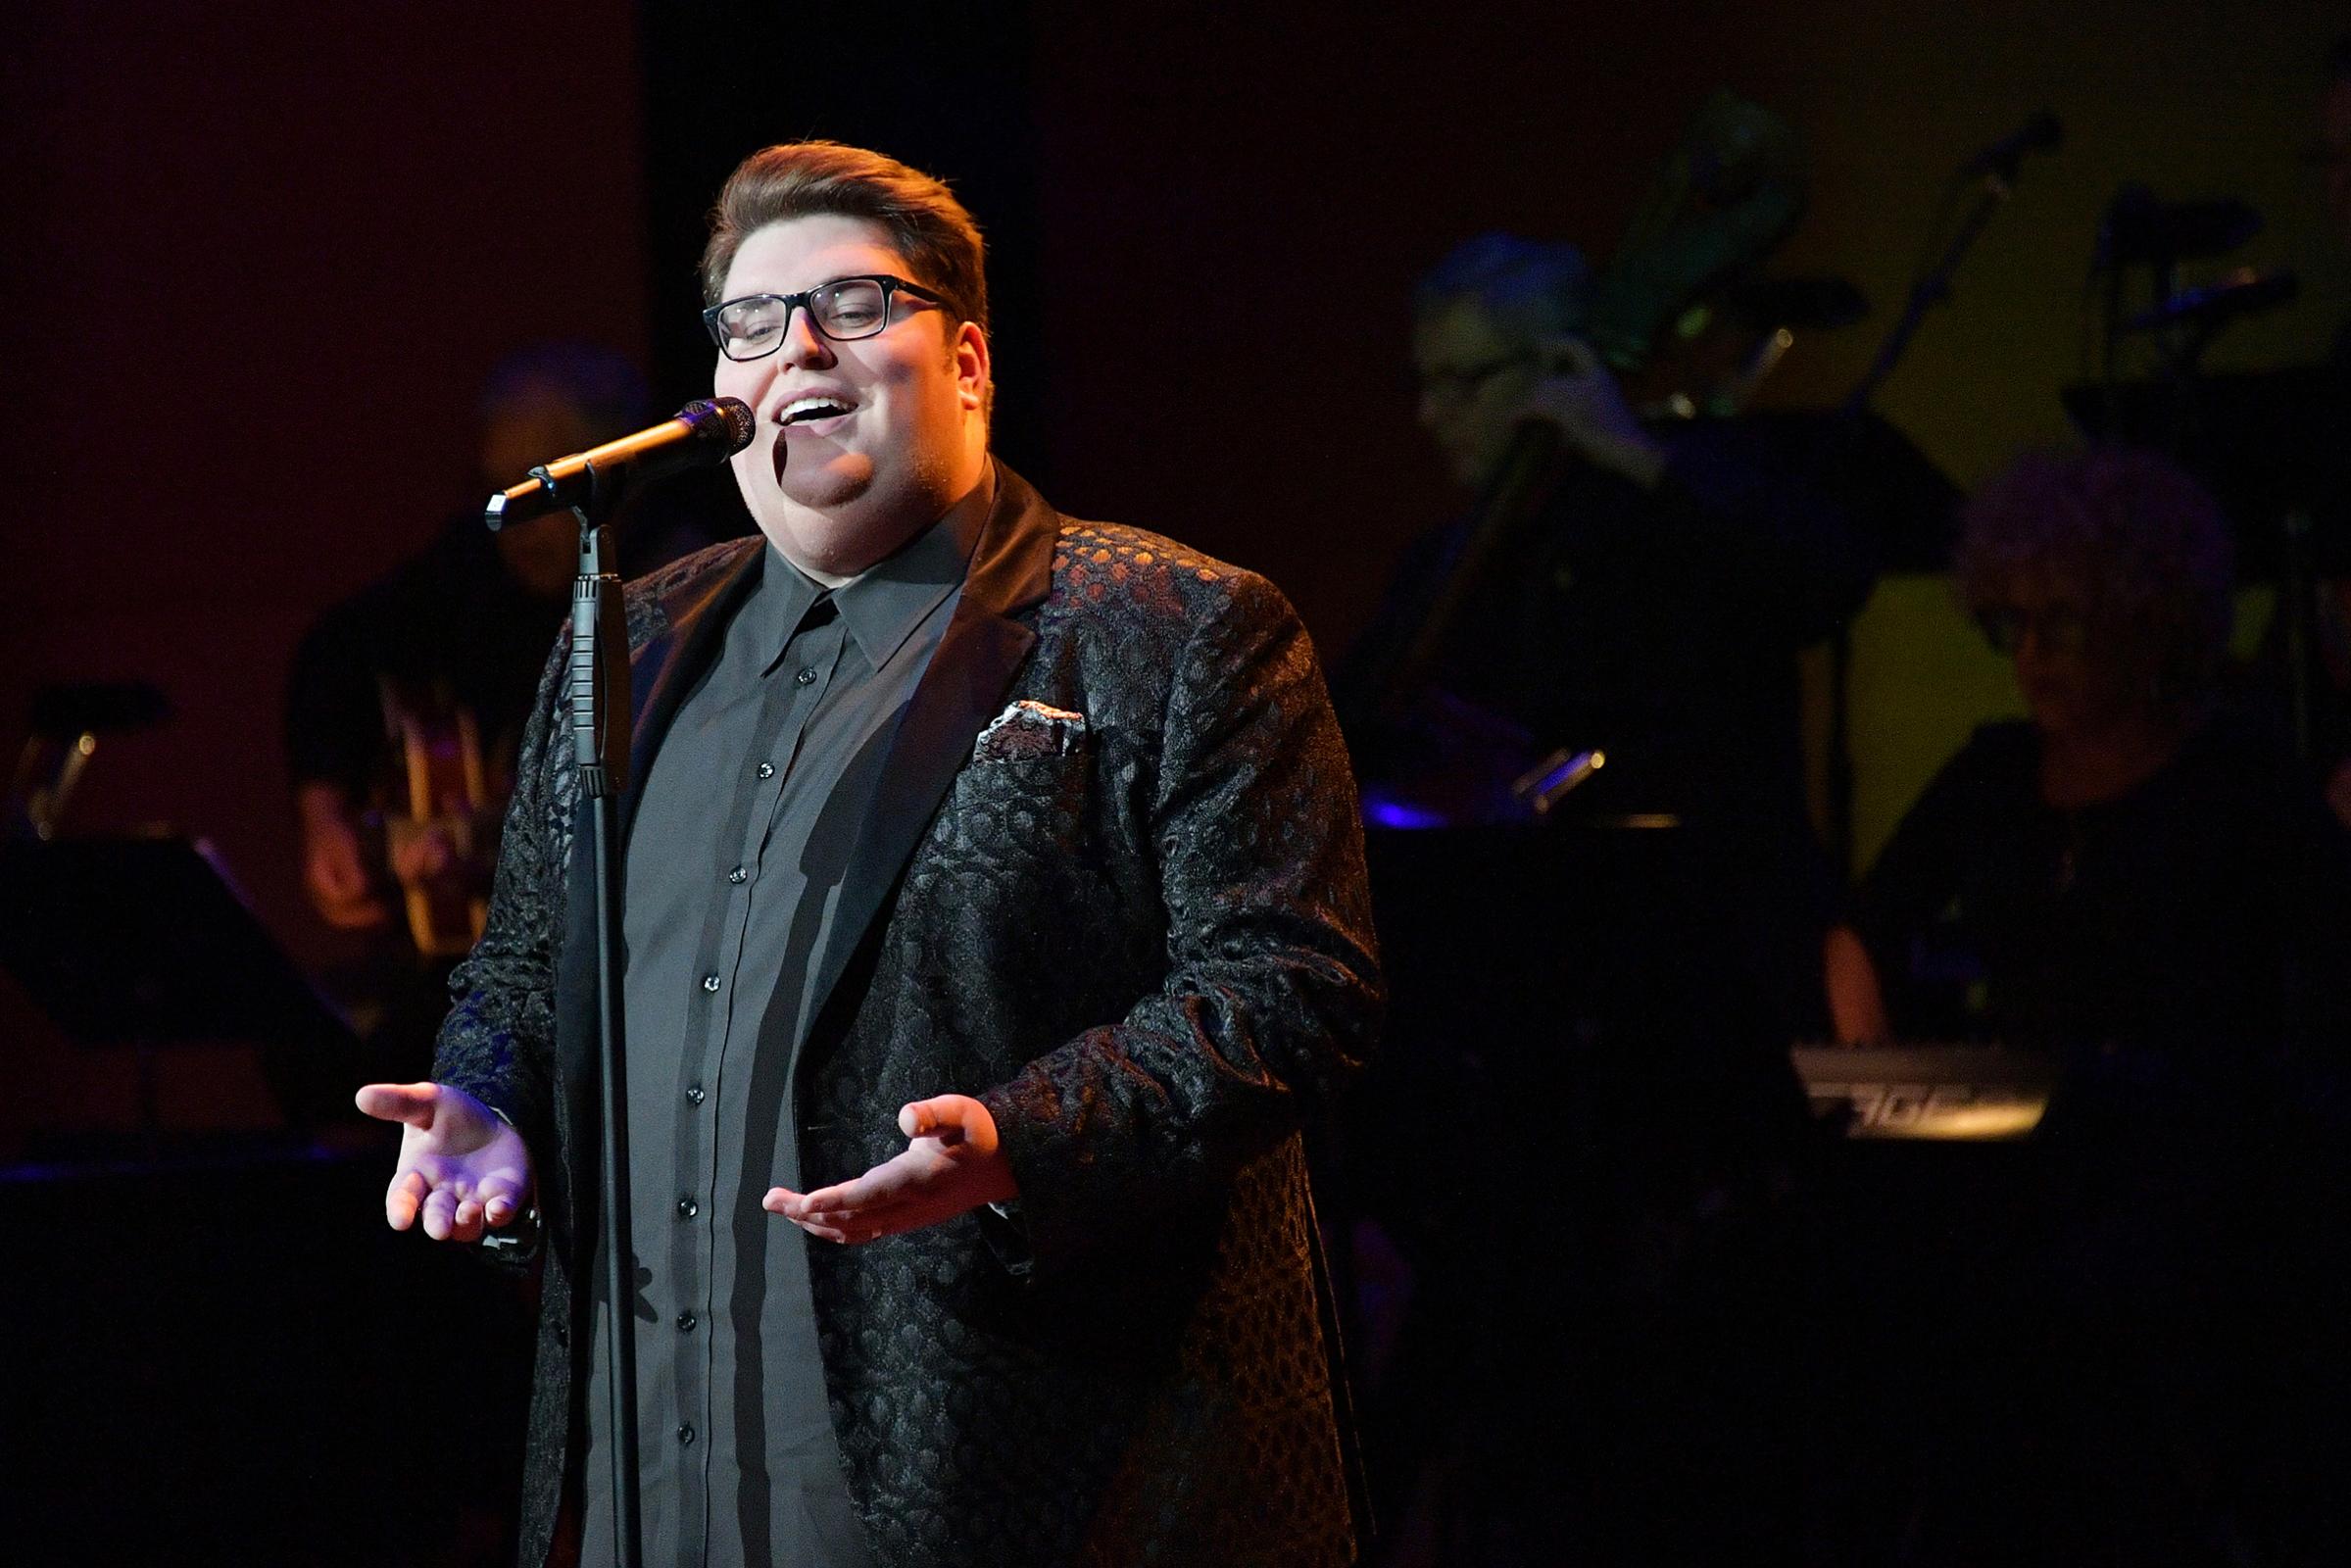 Singer Jordan Smith performs onstage during Lincoln Center's American Songbook Gala at Alice Tully Hall on May 29, 2018.